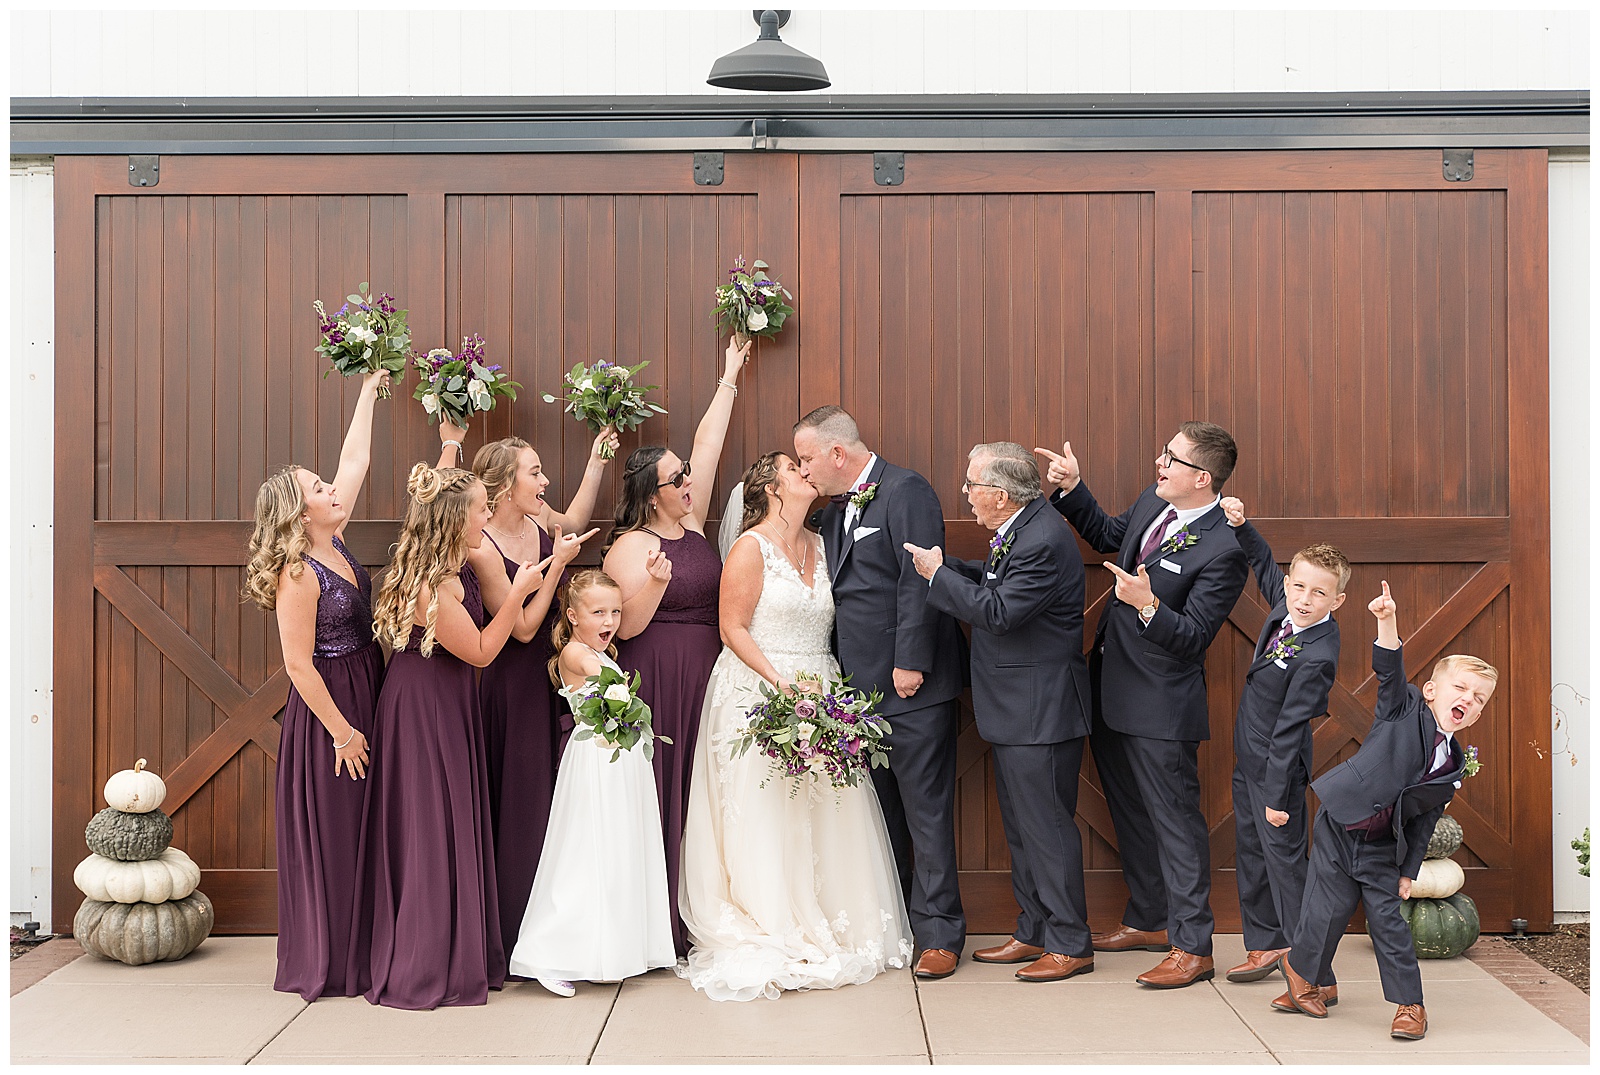 Full Bridal party cheering as bride and groom share a first kiss in front of large wood barn doors